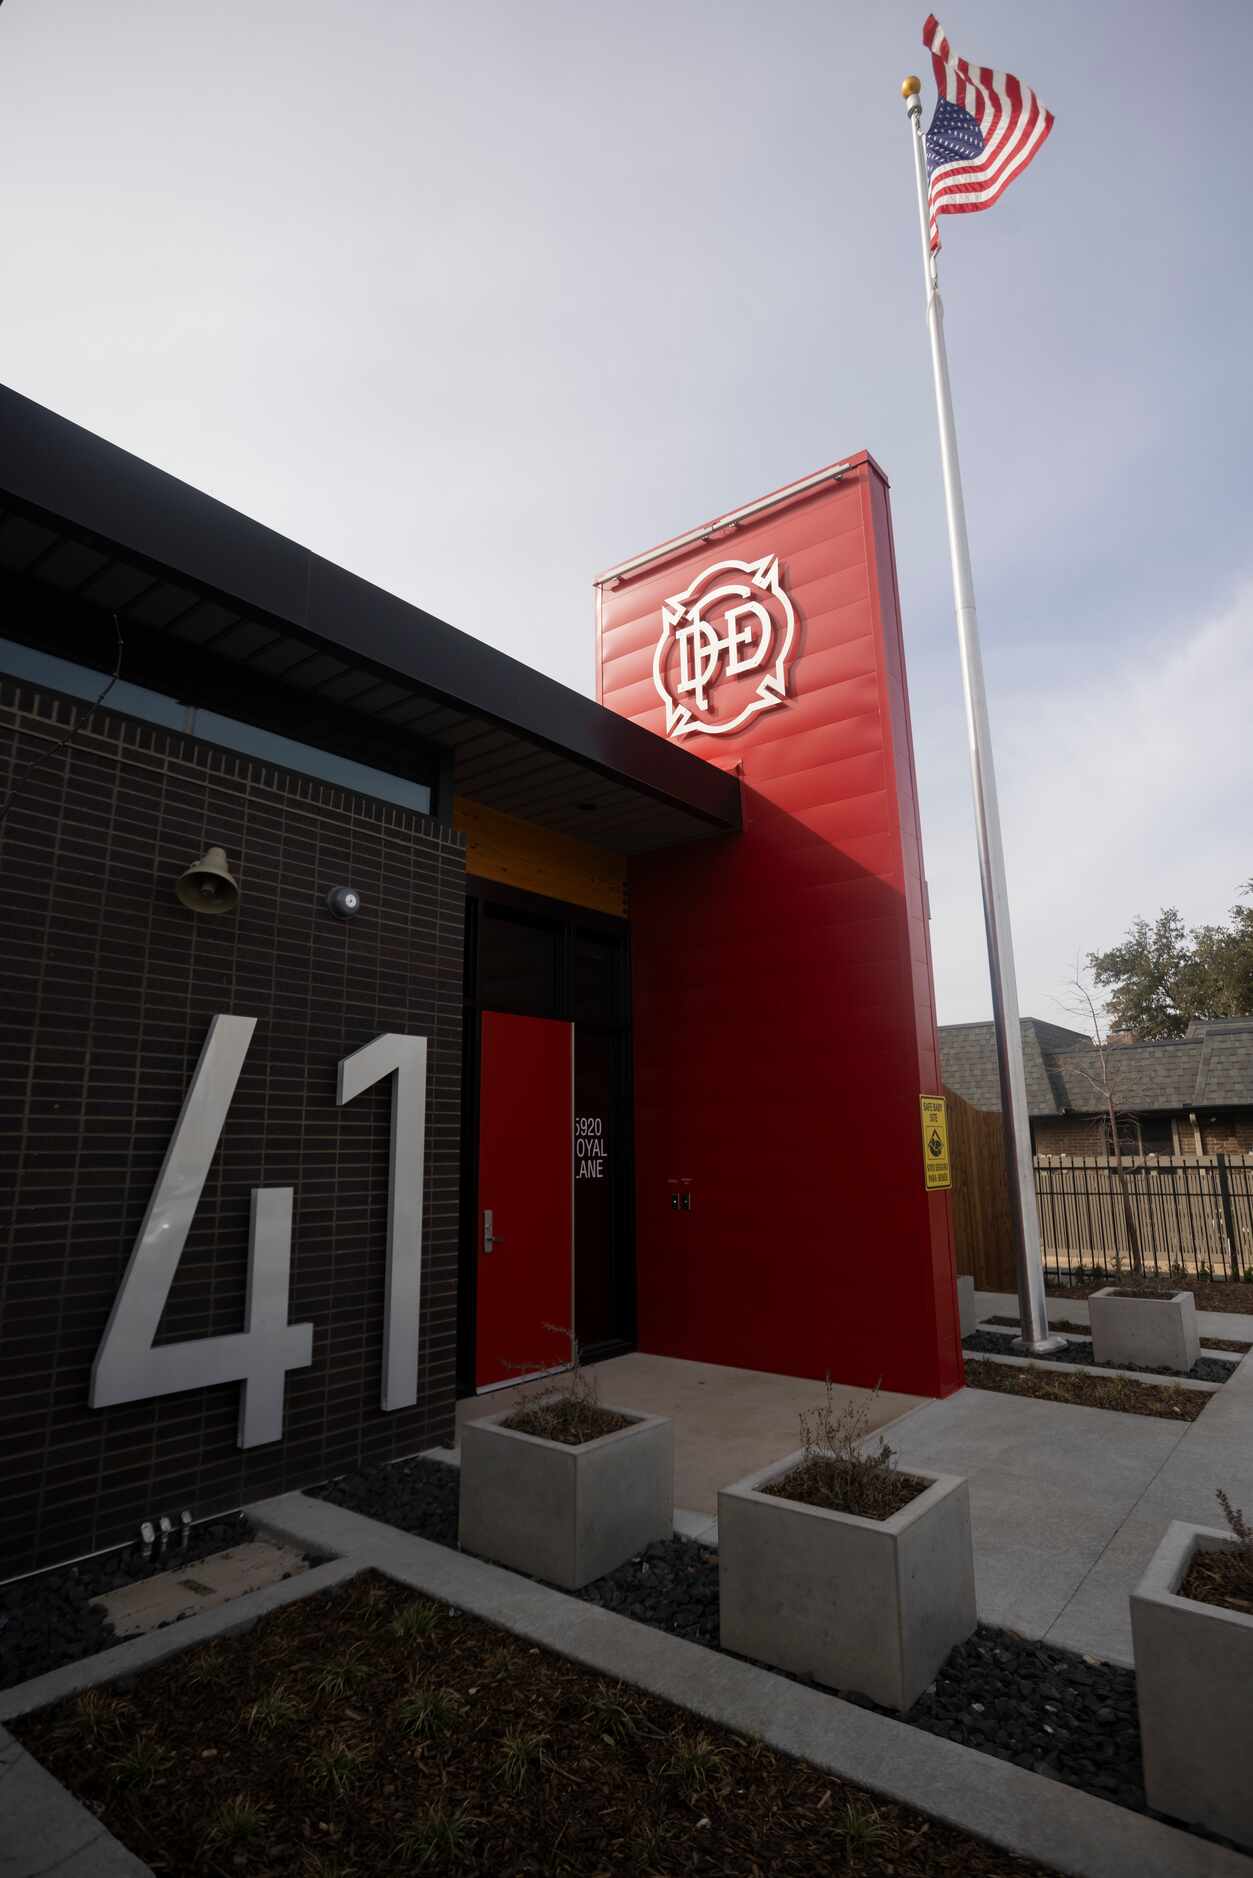 The exterior of the new Dallas Fire Station No. 41 following the grand re-opening ceremony...